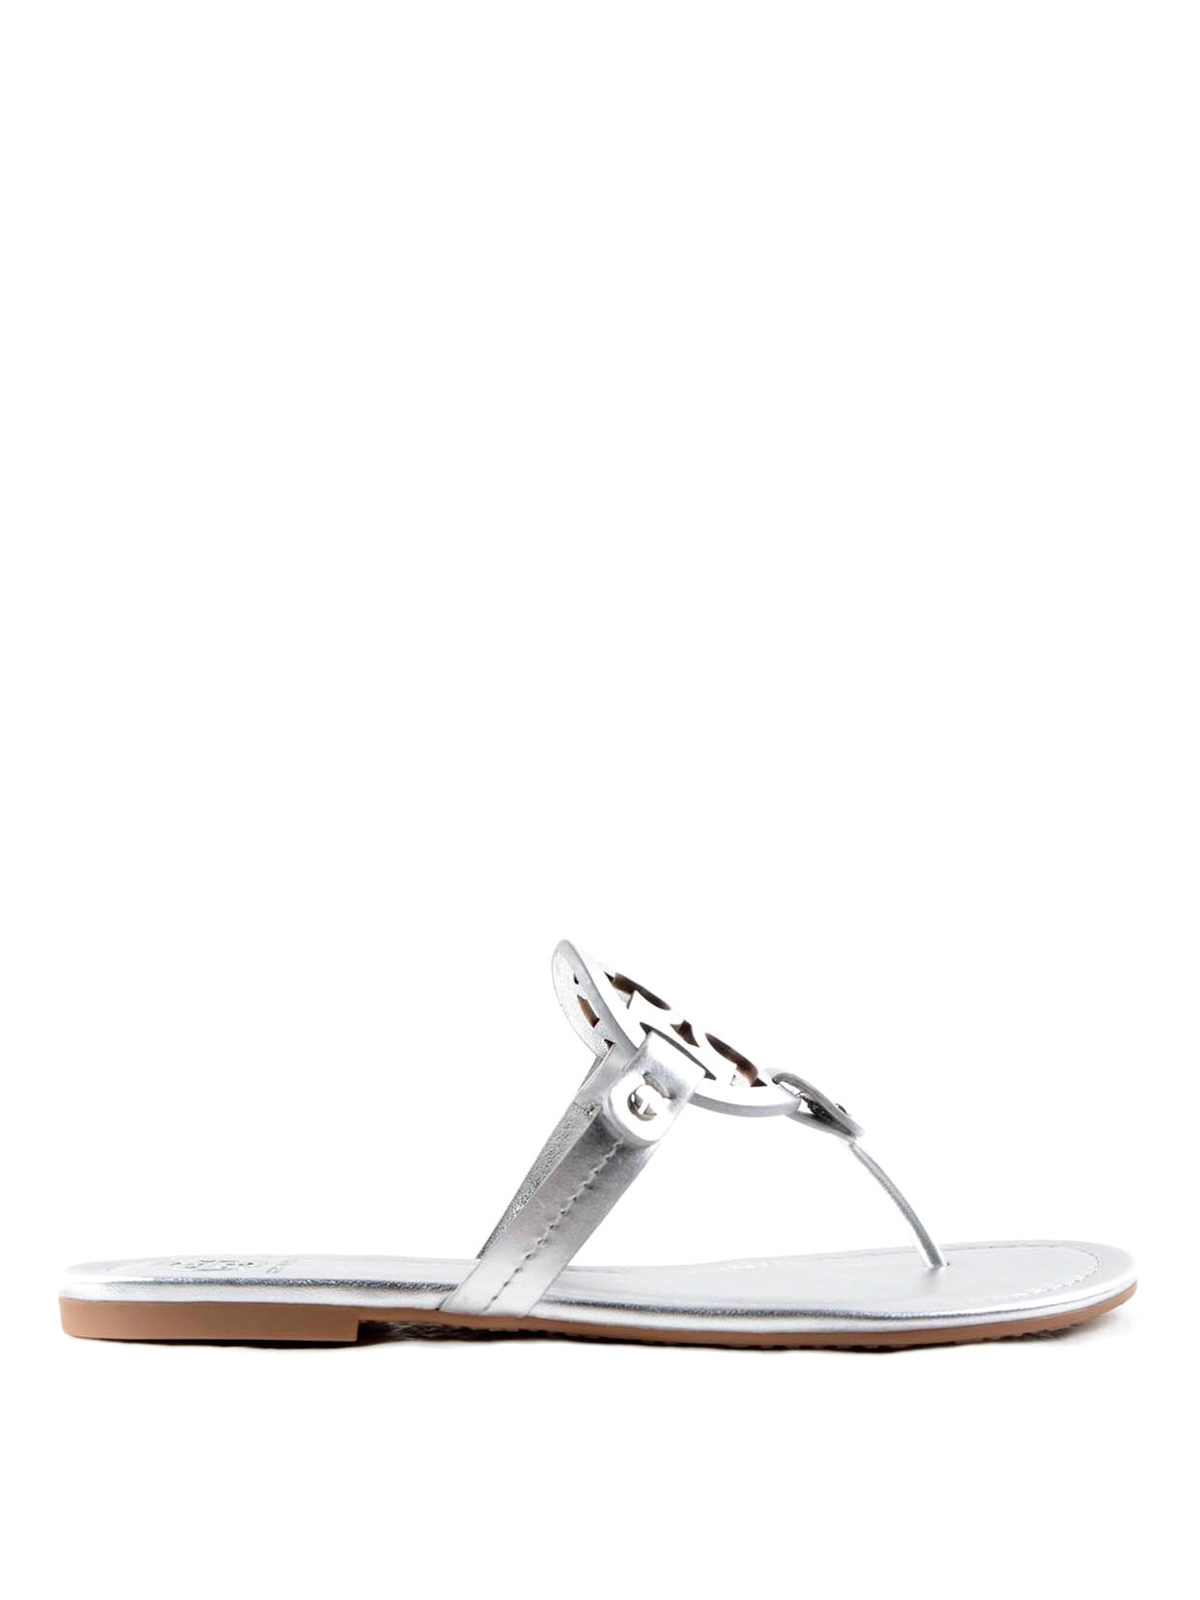 Sandals Tory Burch - Miller leather thong sandals - 36540040 